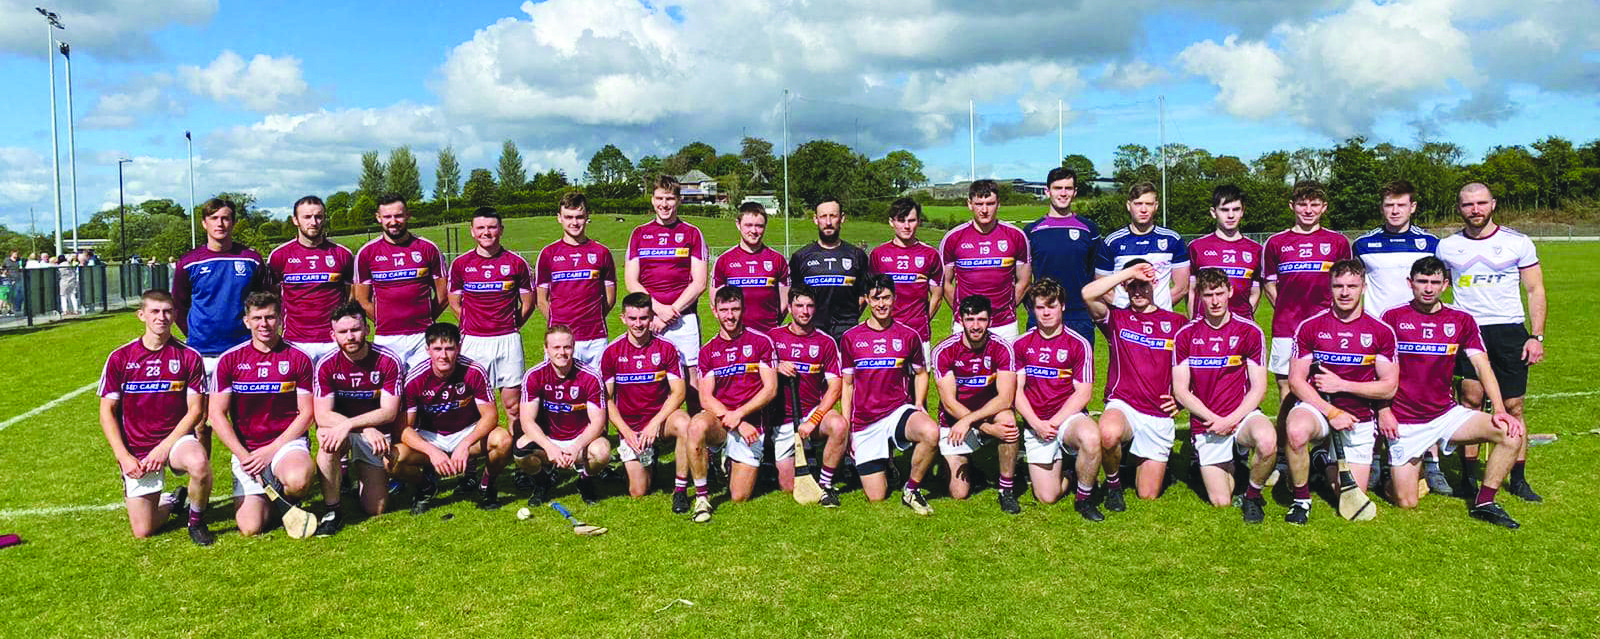 The Bredagh senior hurlers ahead of their impressive win over Ballygalget in the final group game